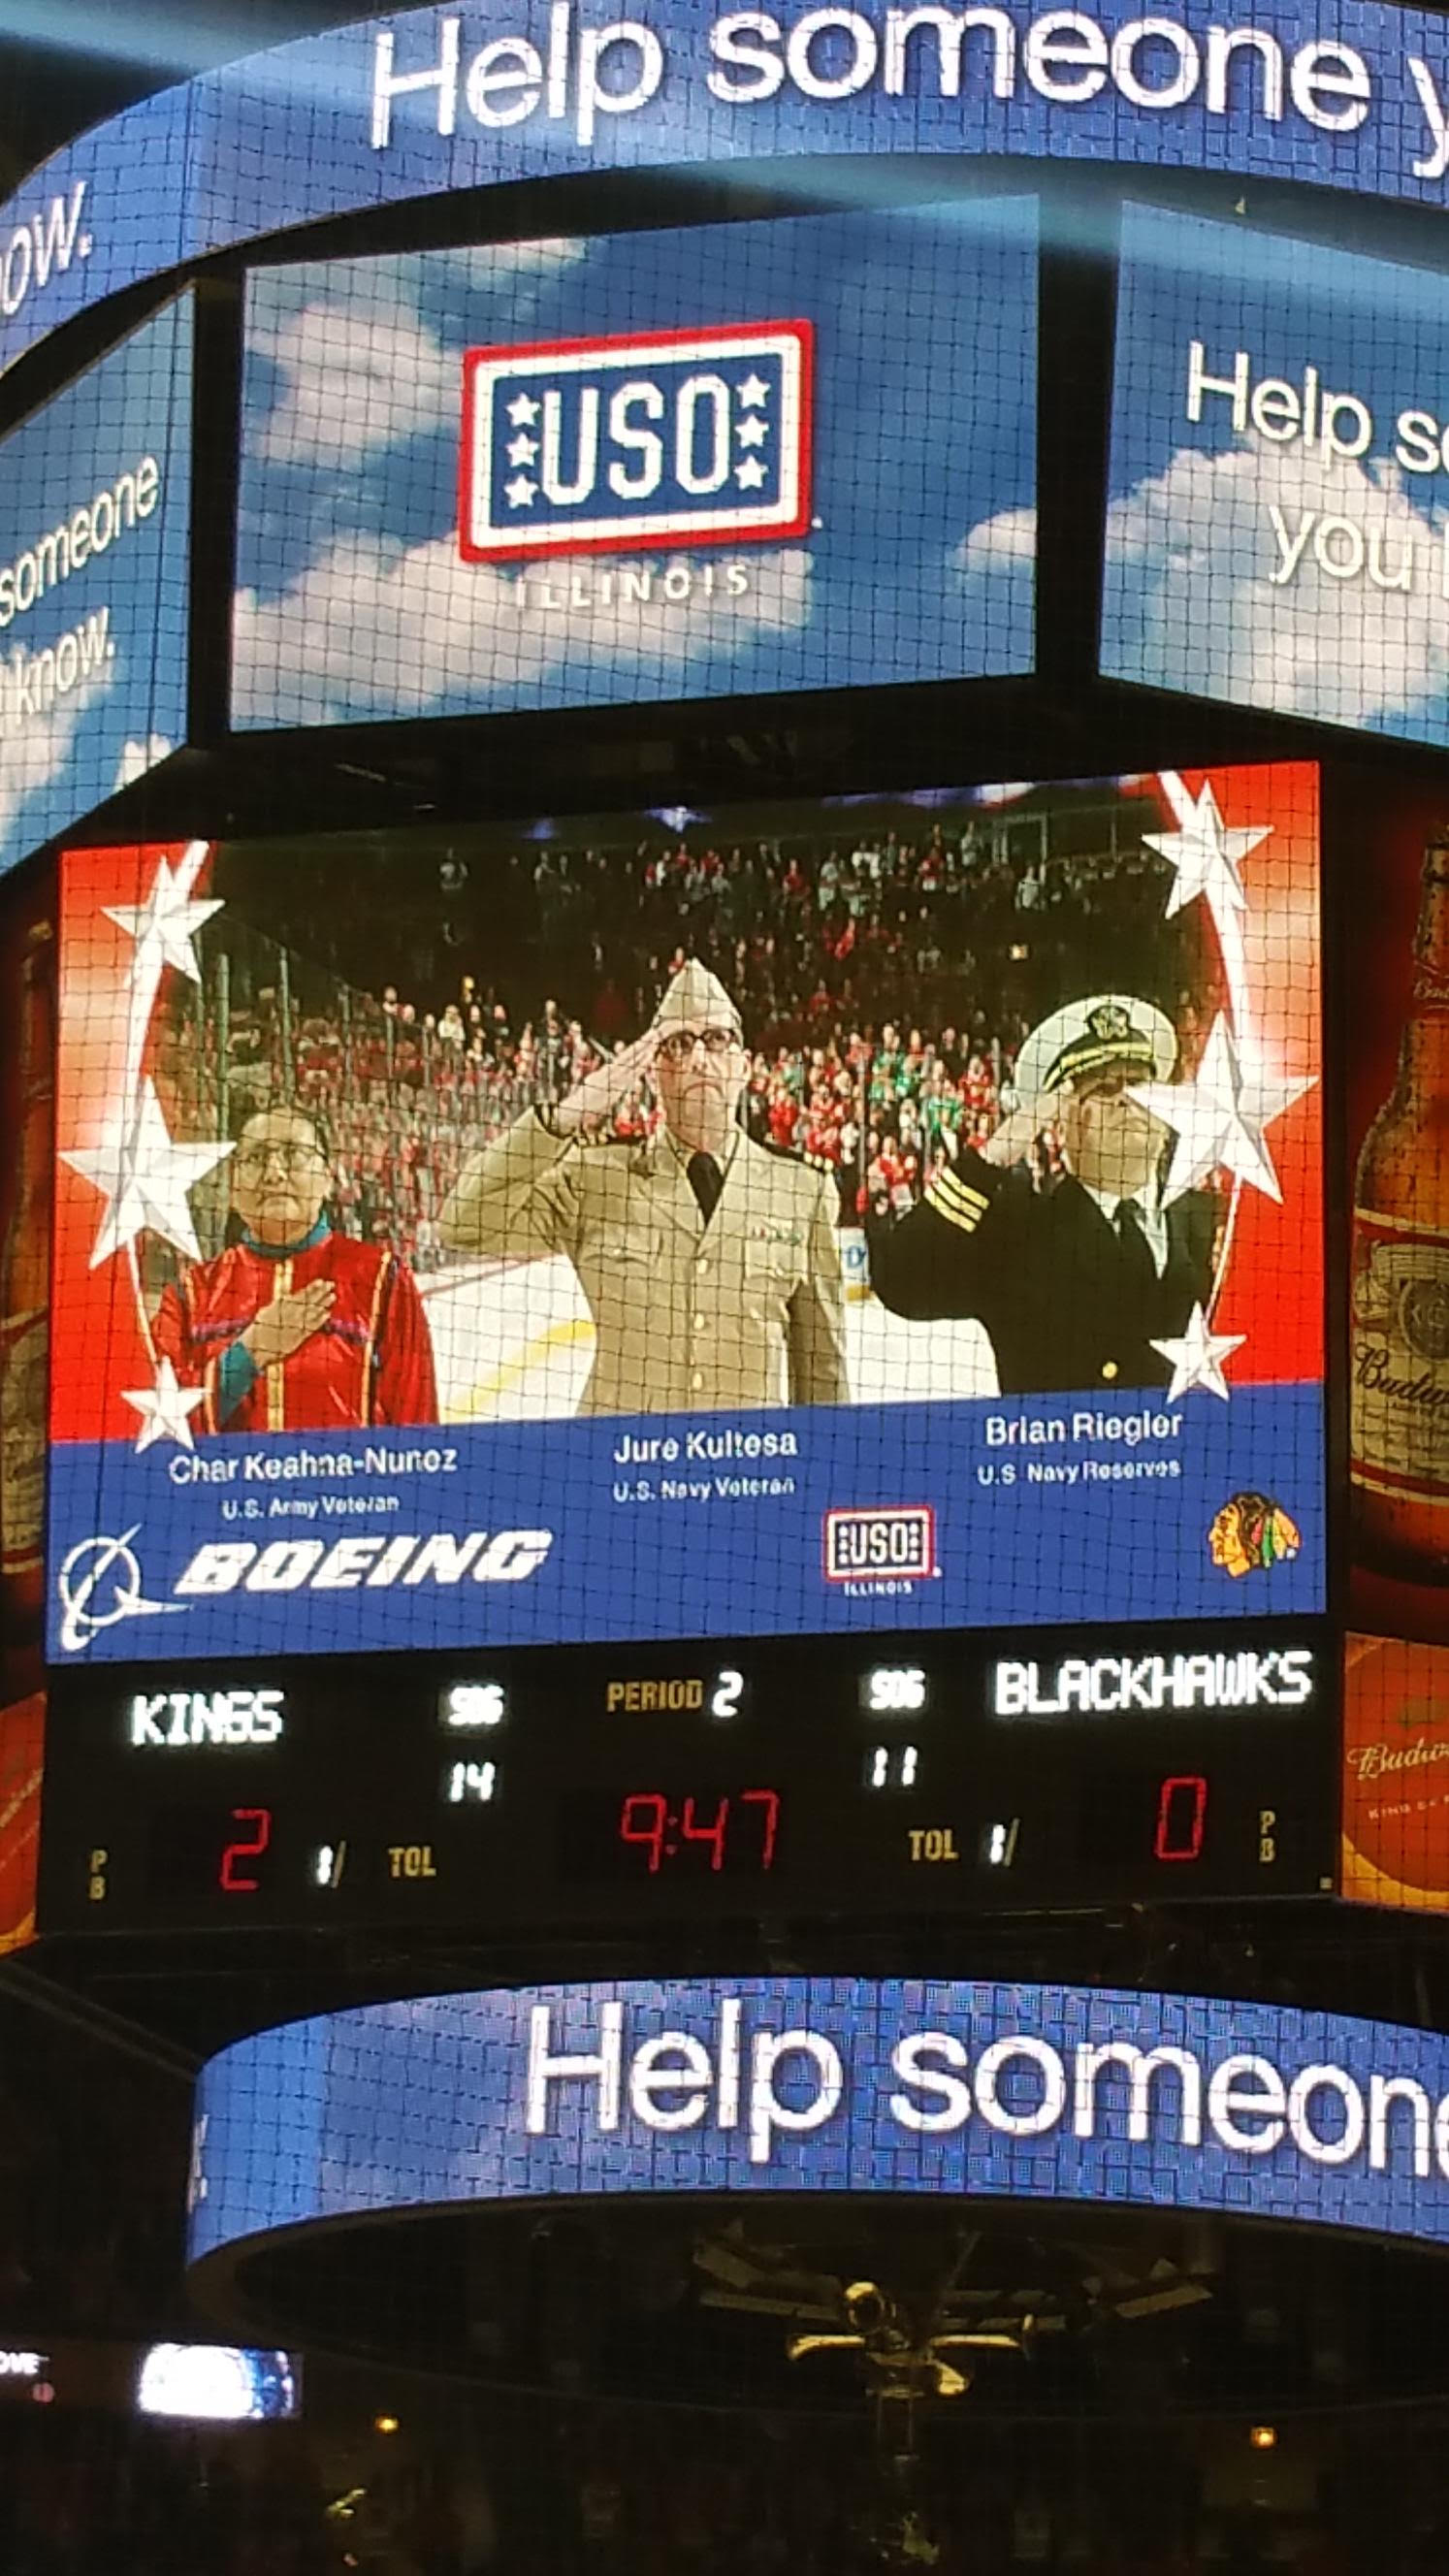 Riegler was recently honored at a Chicago Blackhawks game. (Courtesy Brien Riegler)